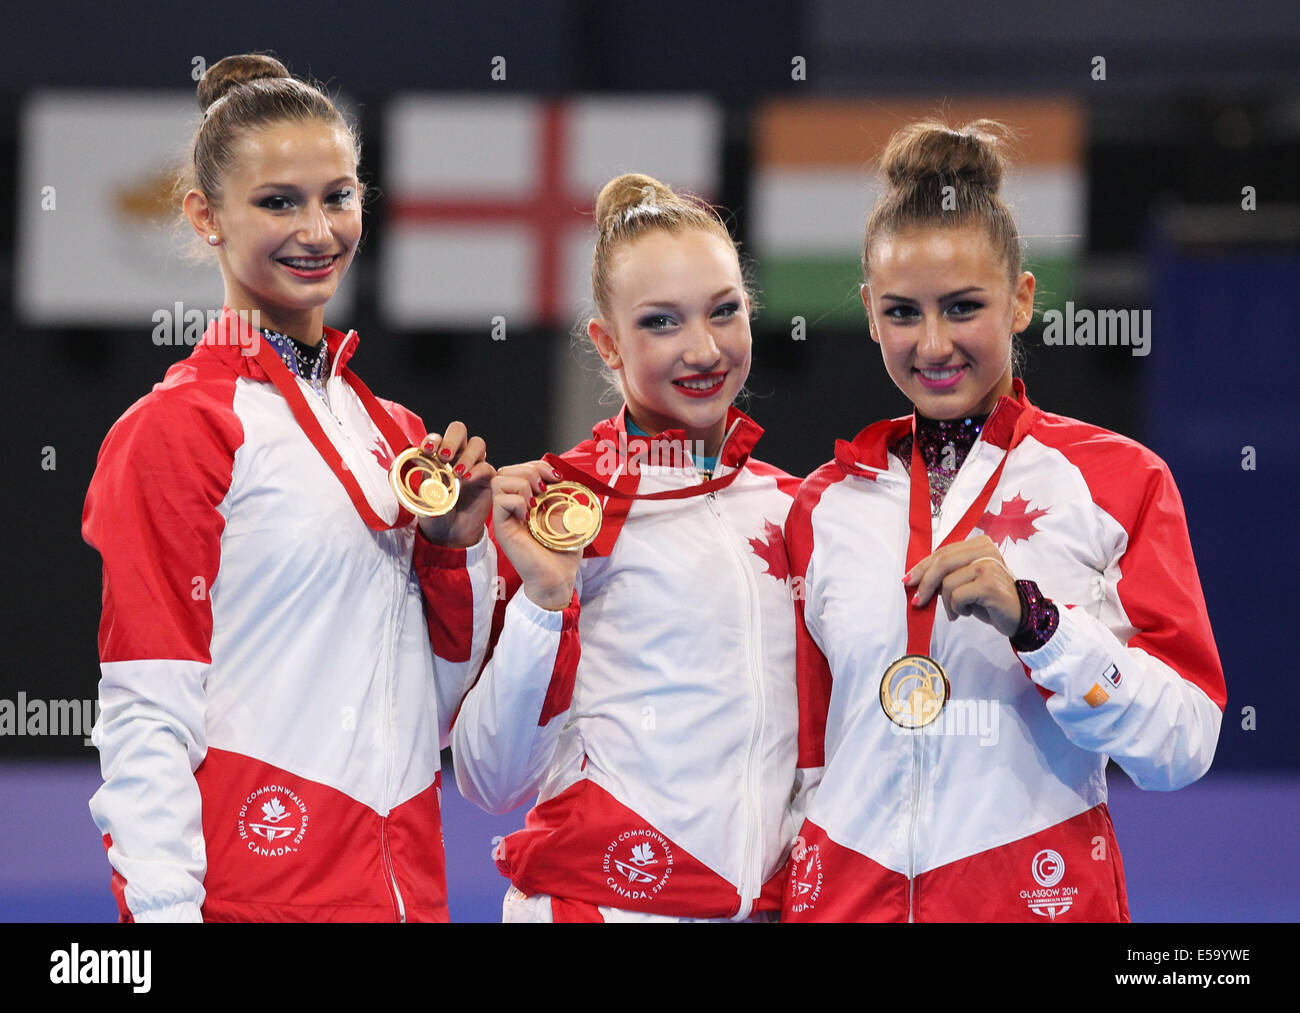 Glasgow. 24th July, 2014. Athletes of Canada pose during the the awarding ceremony for Team Final of Gymnastics Rhythmic at the 2014 Glasgow Commonwealth Games held in Glasgow, Scotland on July 24, 2014. Canada won the gold medal with a total point of 141.450. Credit:  Han Yan/Xinhua/Alamy Live News Stock Photo